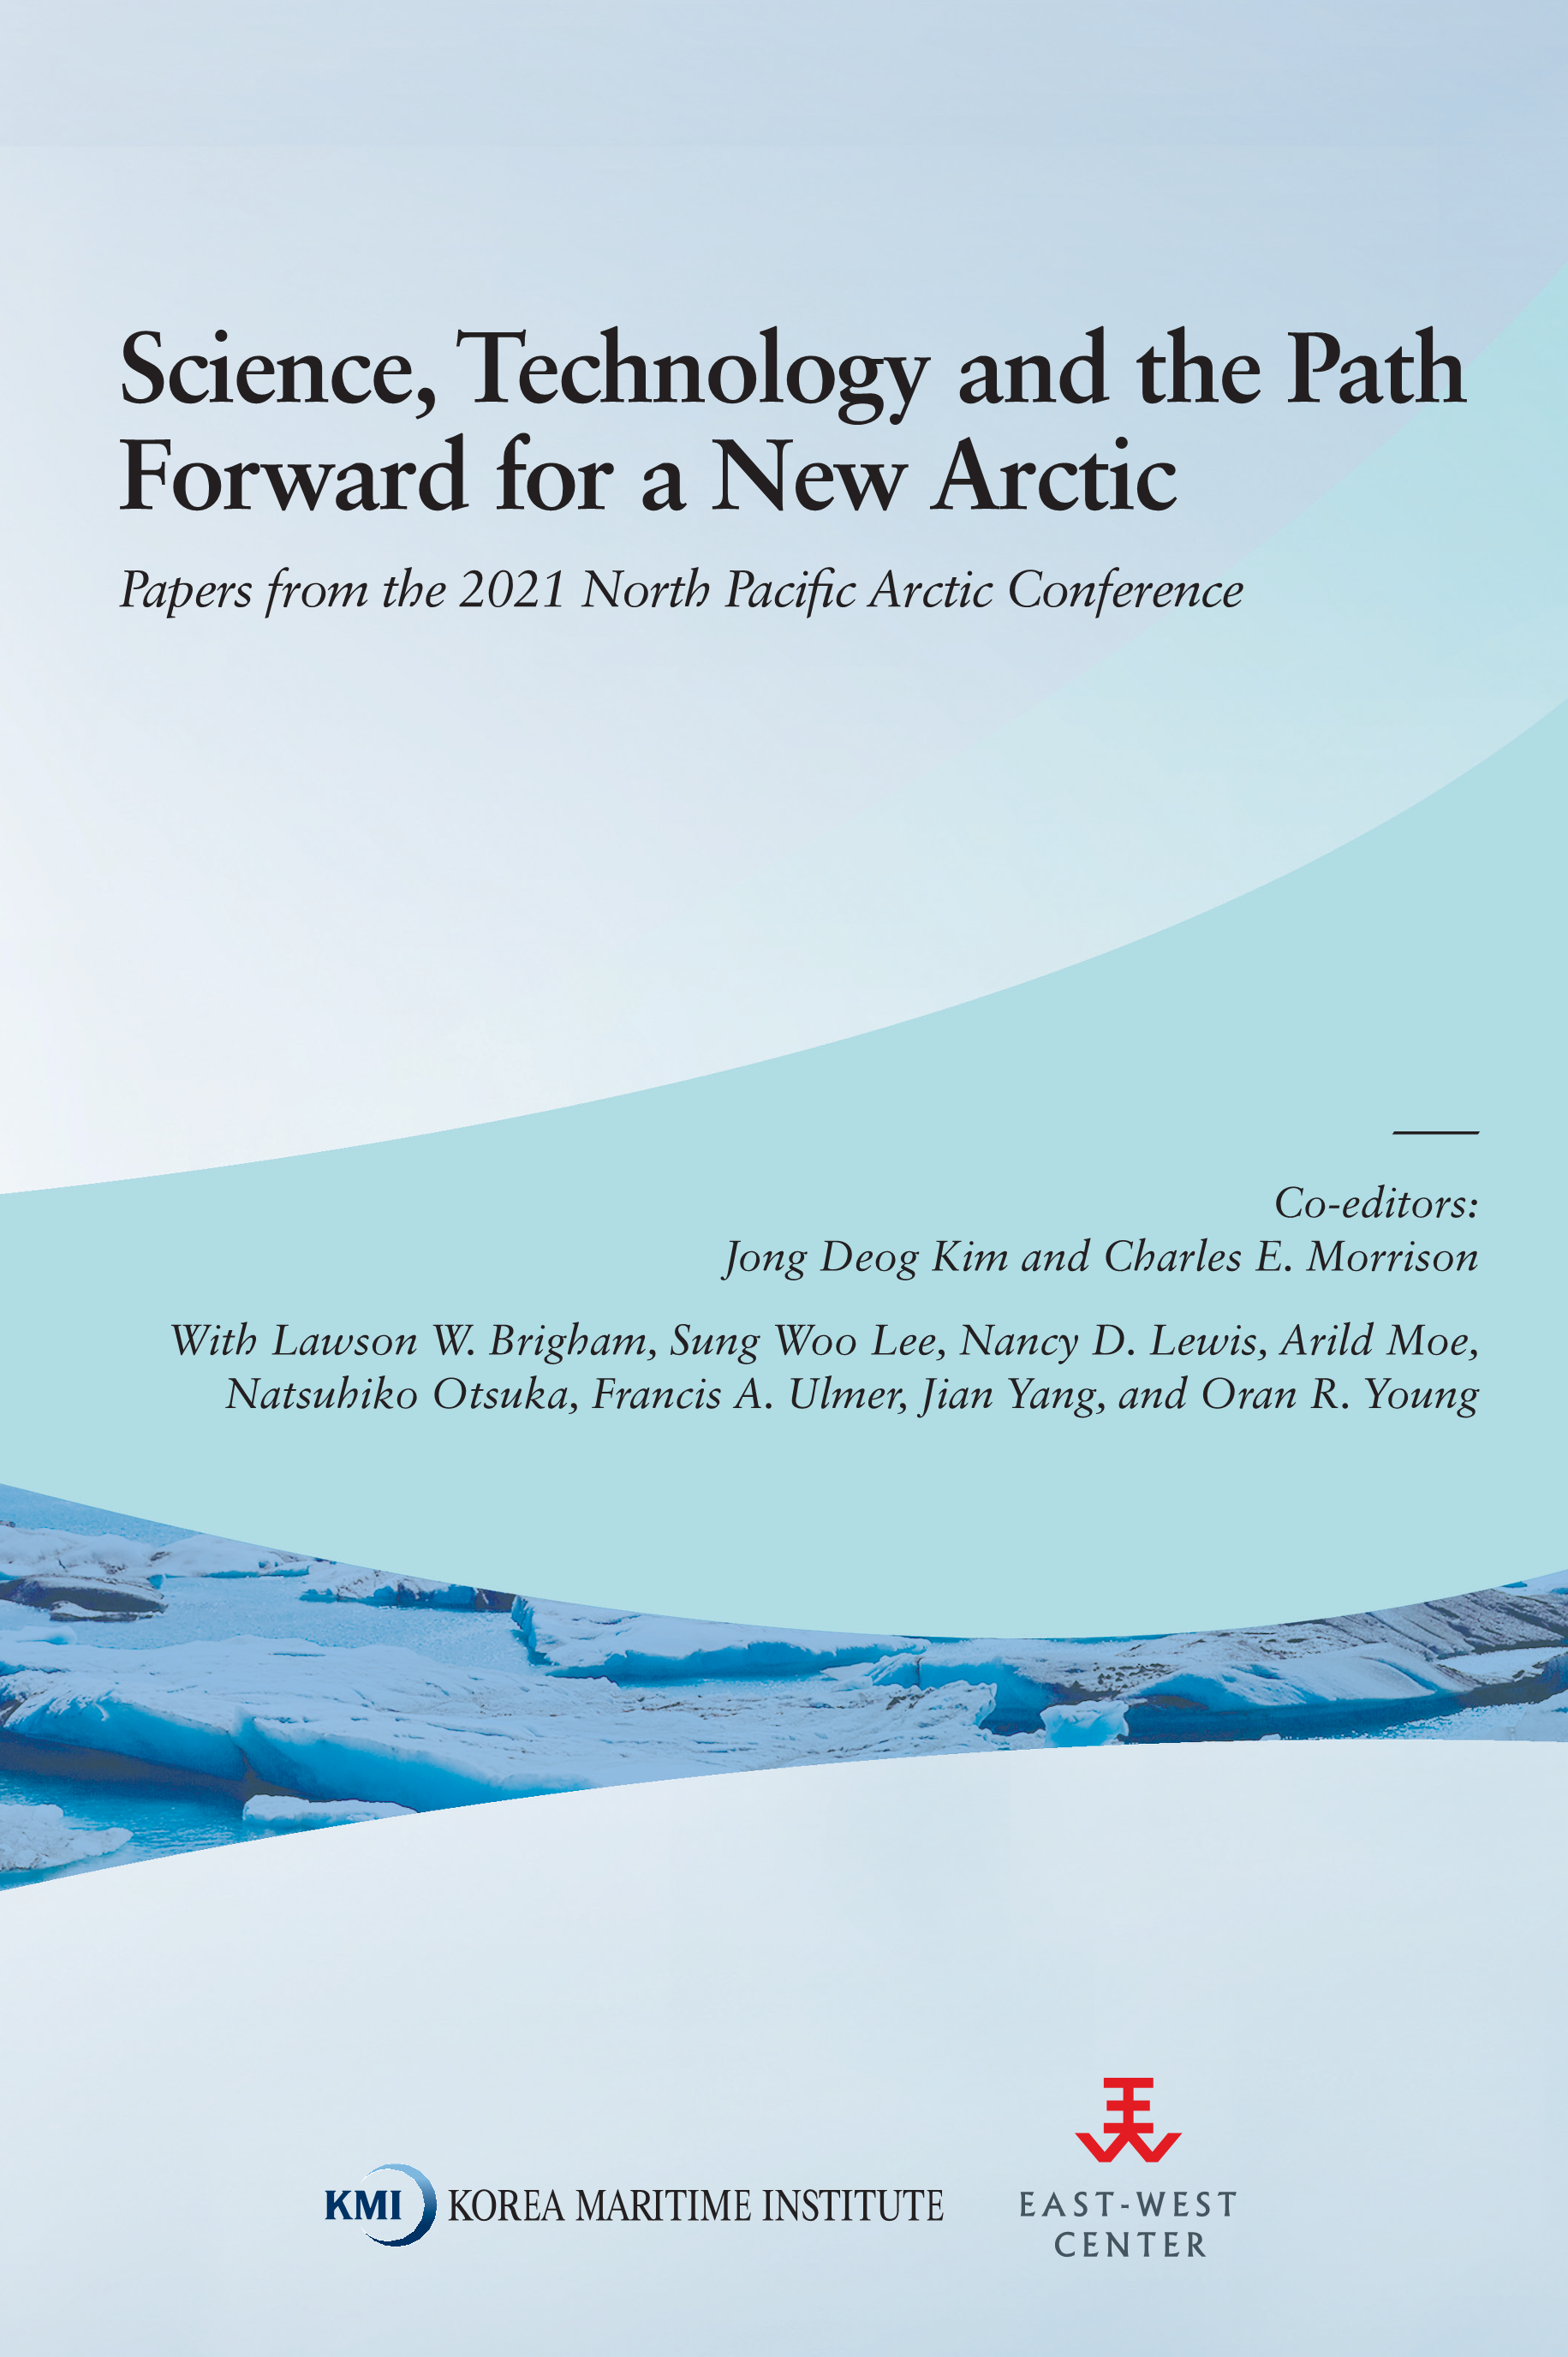 Science, Technology and the Path Forward for a New Arctic